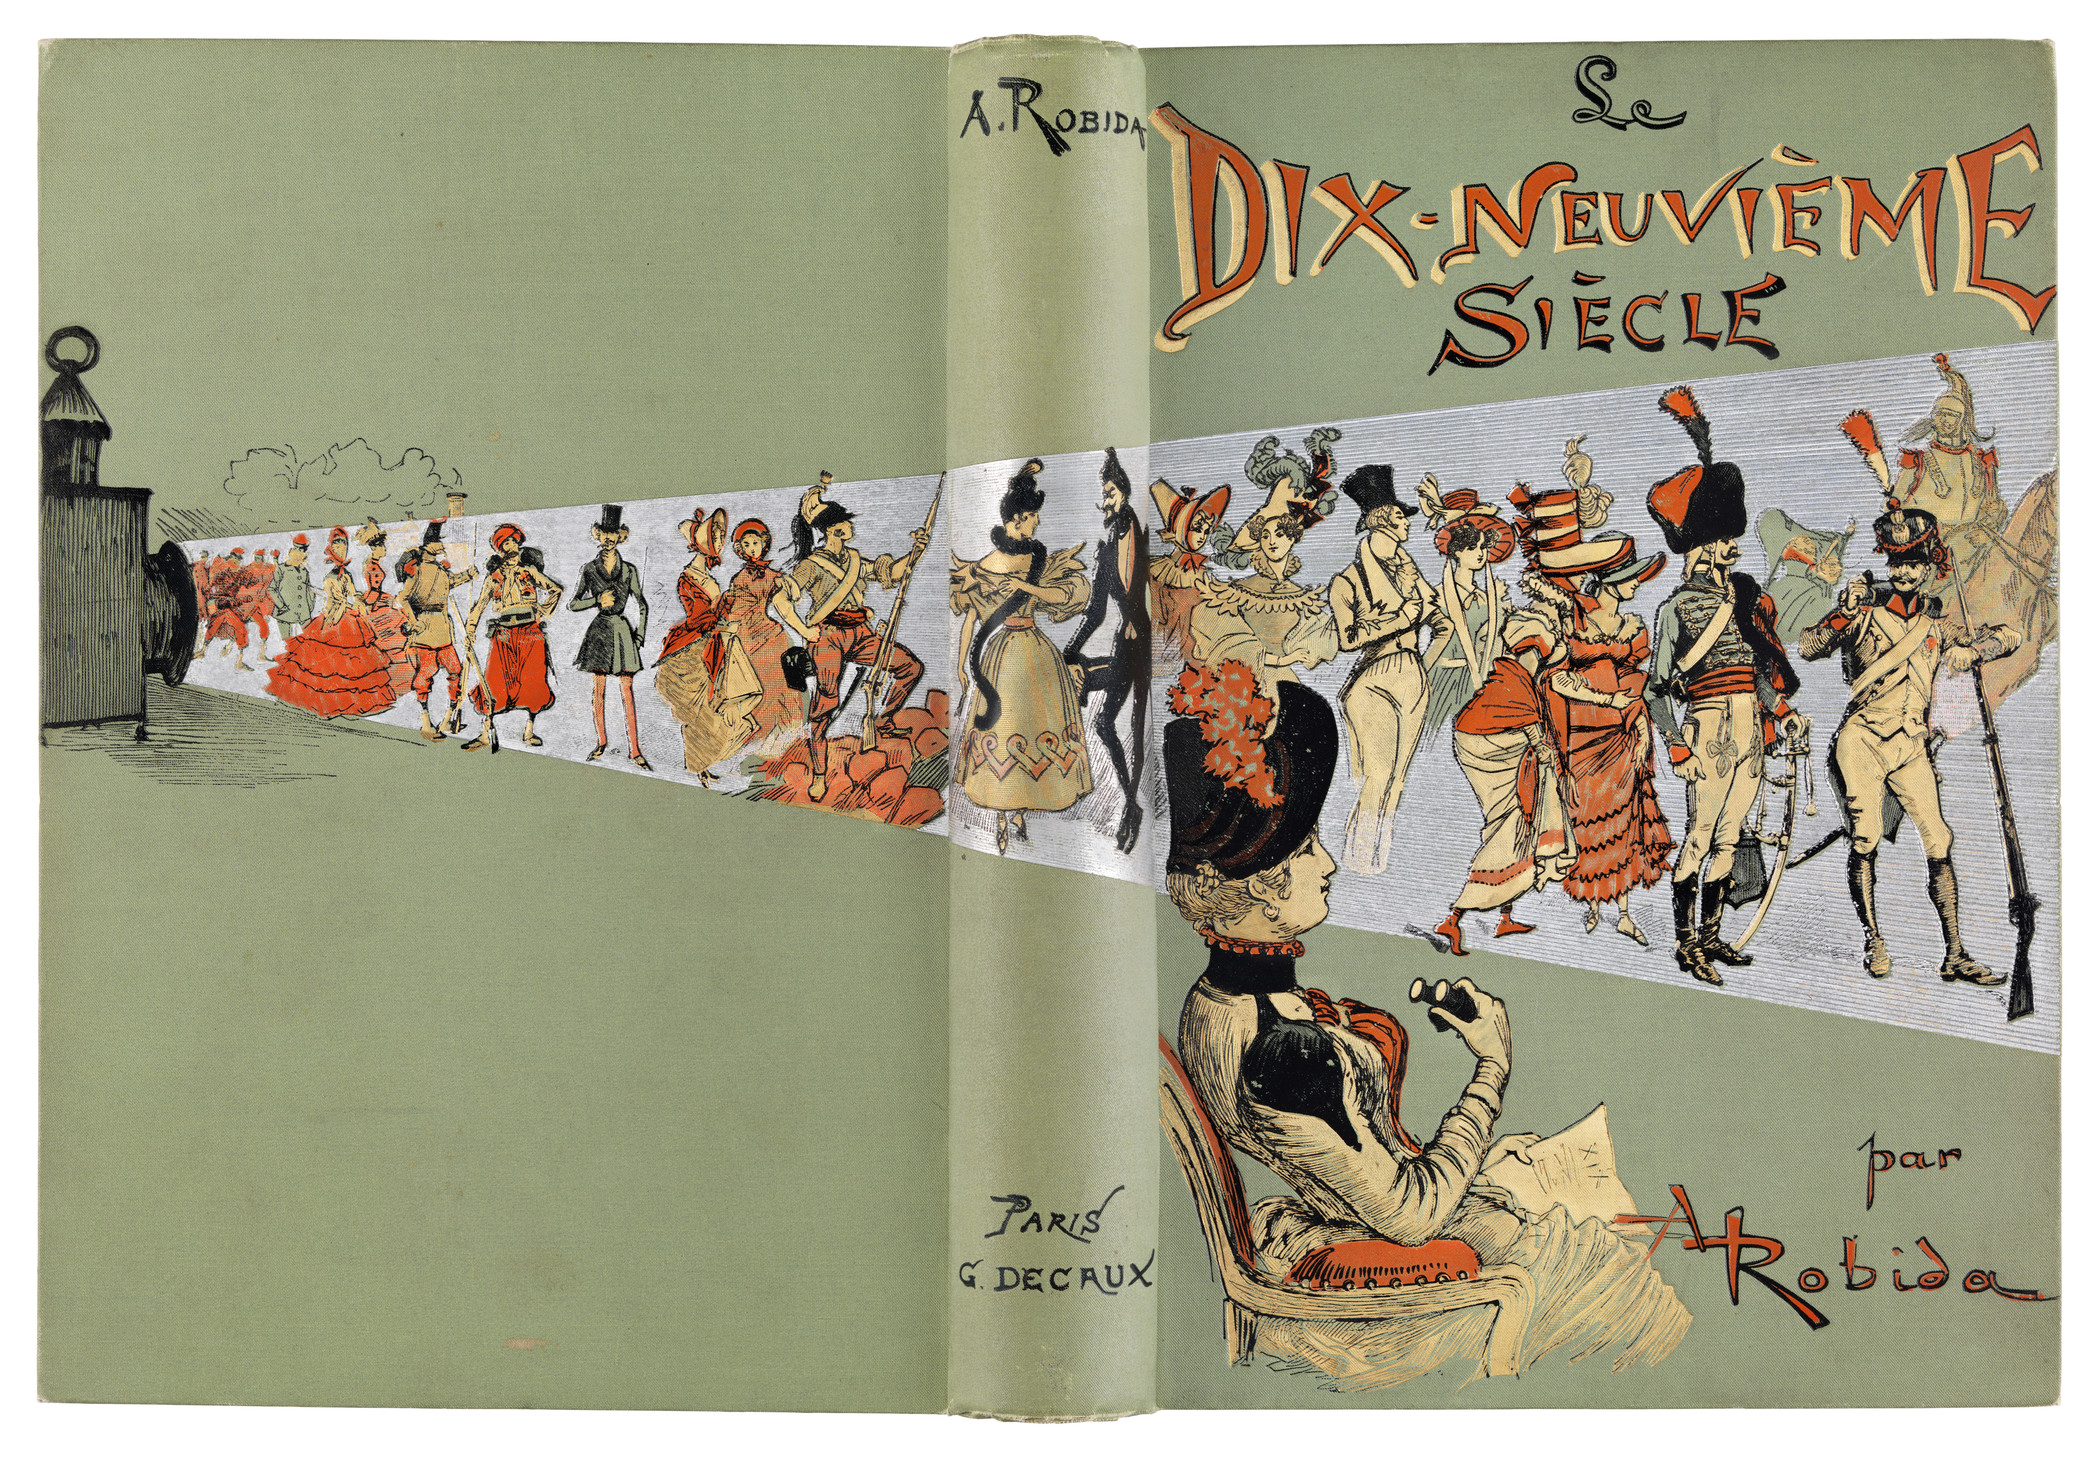 Book illustrated with figures emerging from a projector